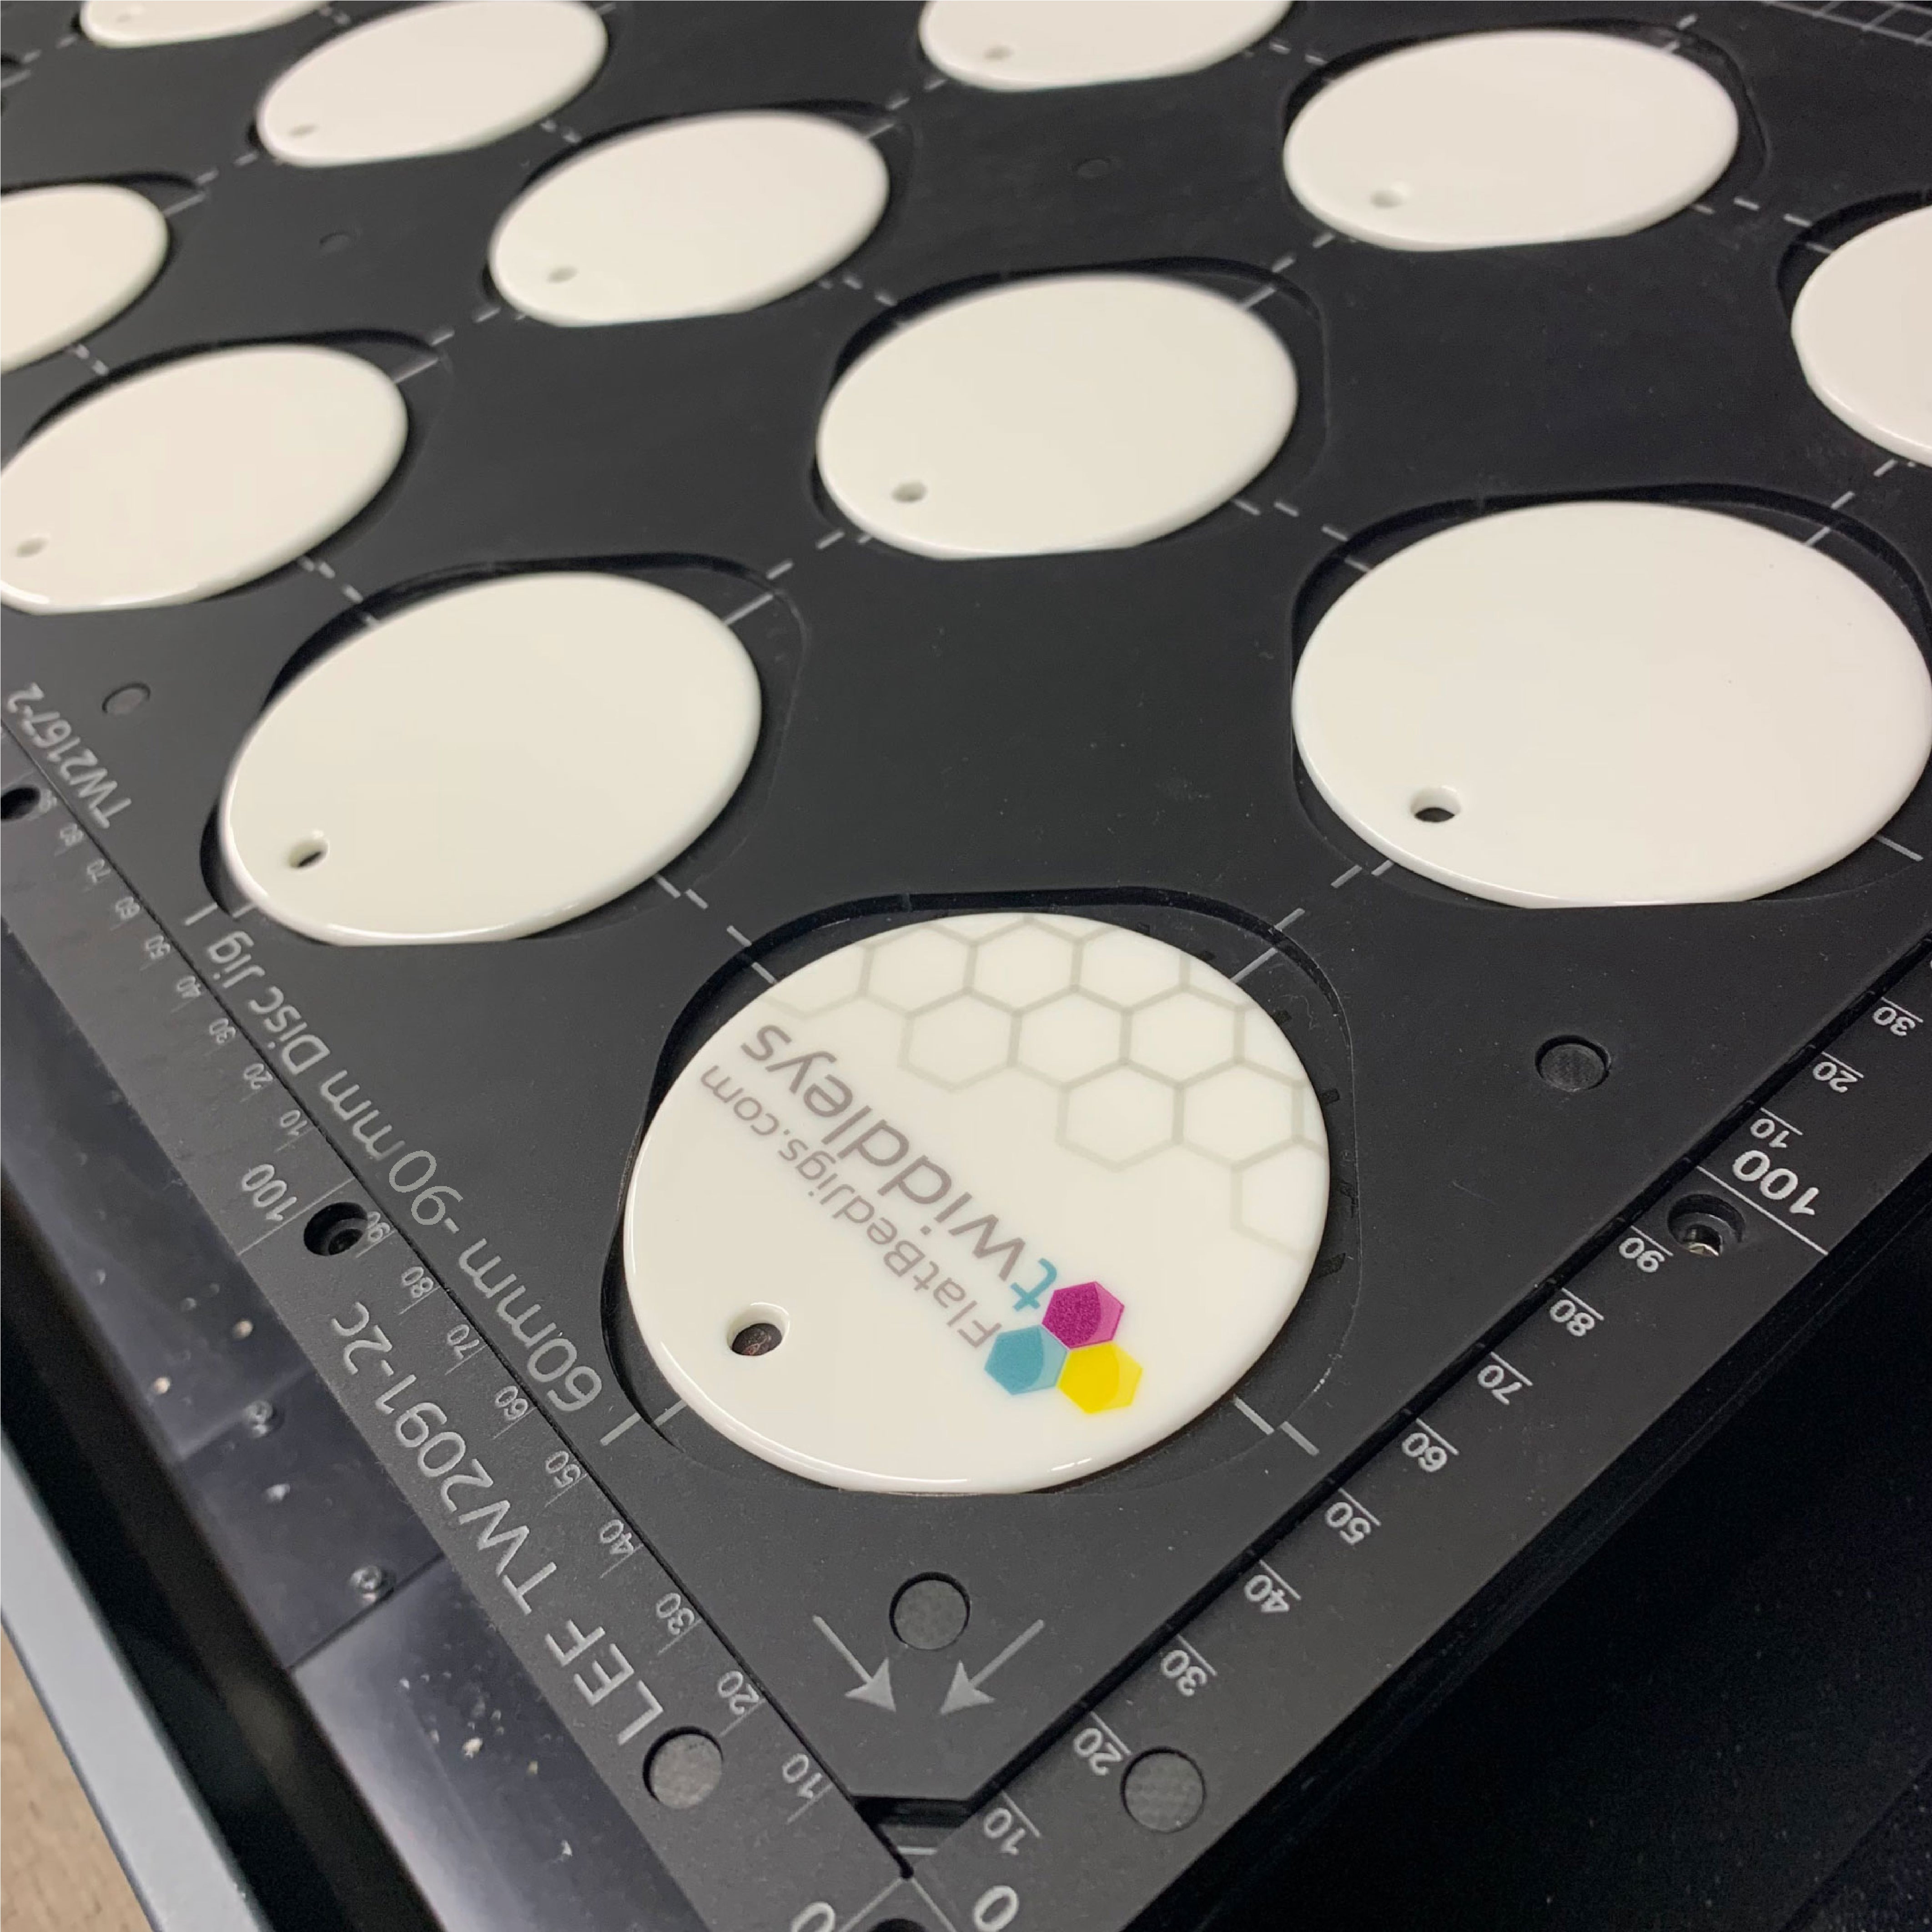 Ceramic Christmas Bauble Printing Jig for Mutoh XPJ-461UF Flatbed Printer - 60mm - 90mm Circular Discs (xx Spaces)